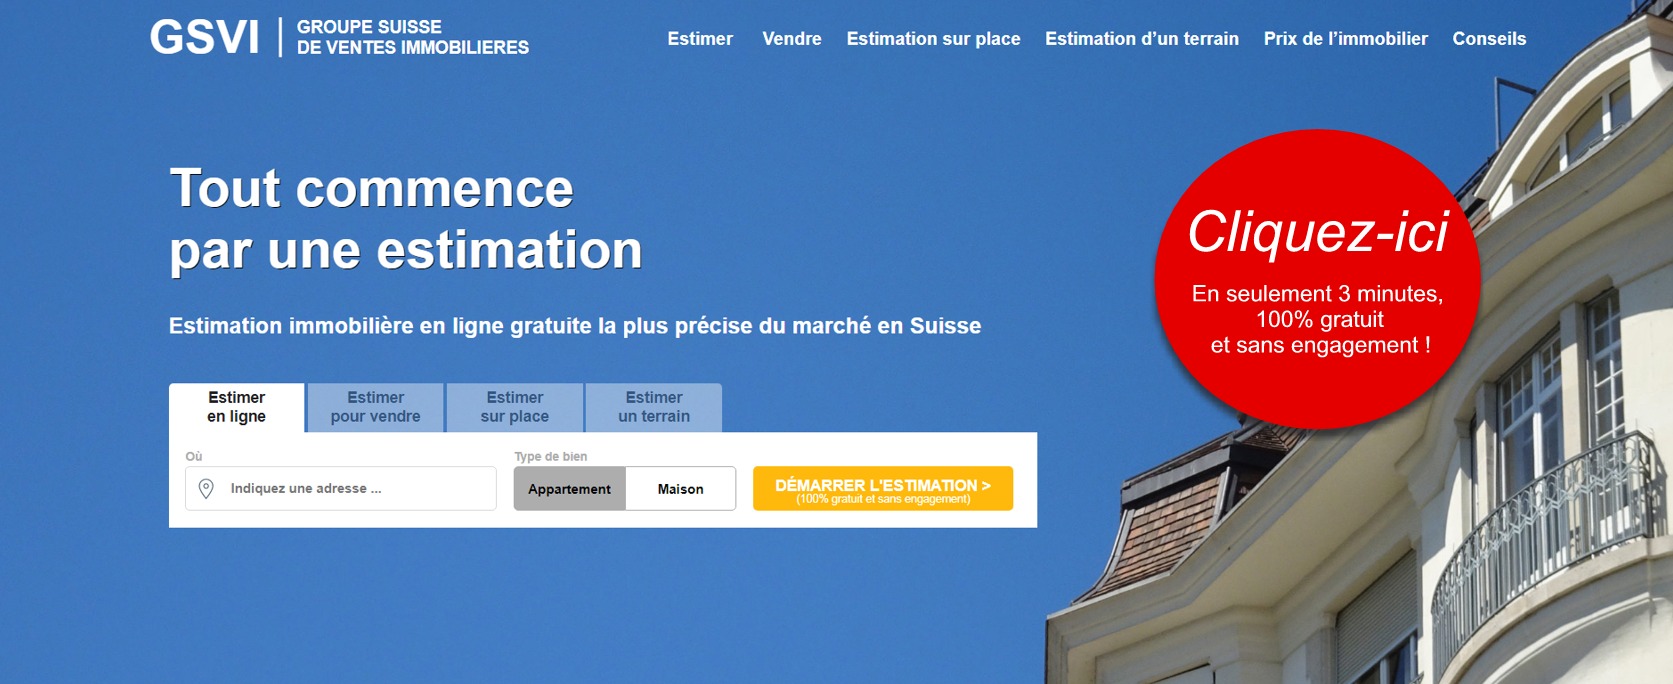 meilleure agence immobiliere suisse